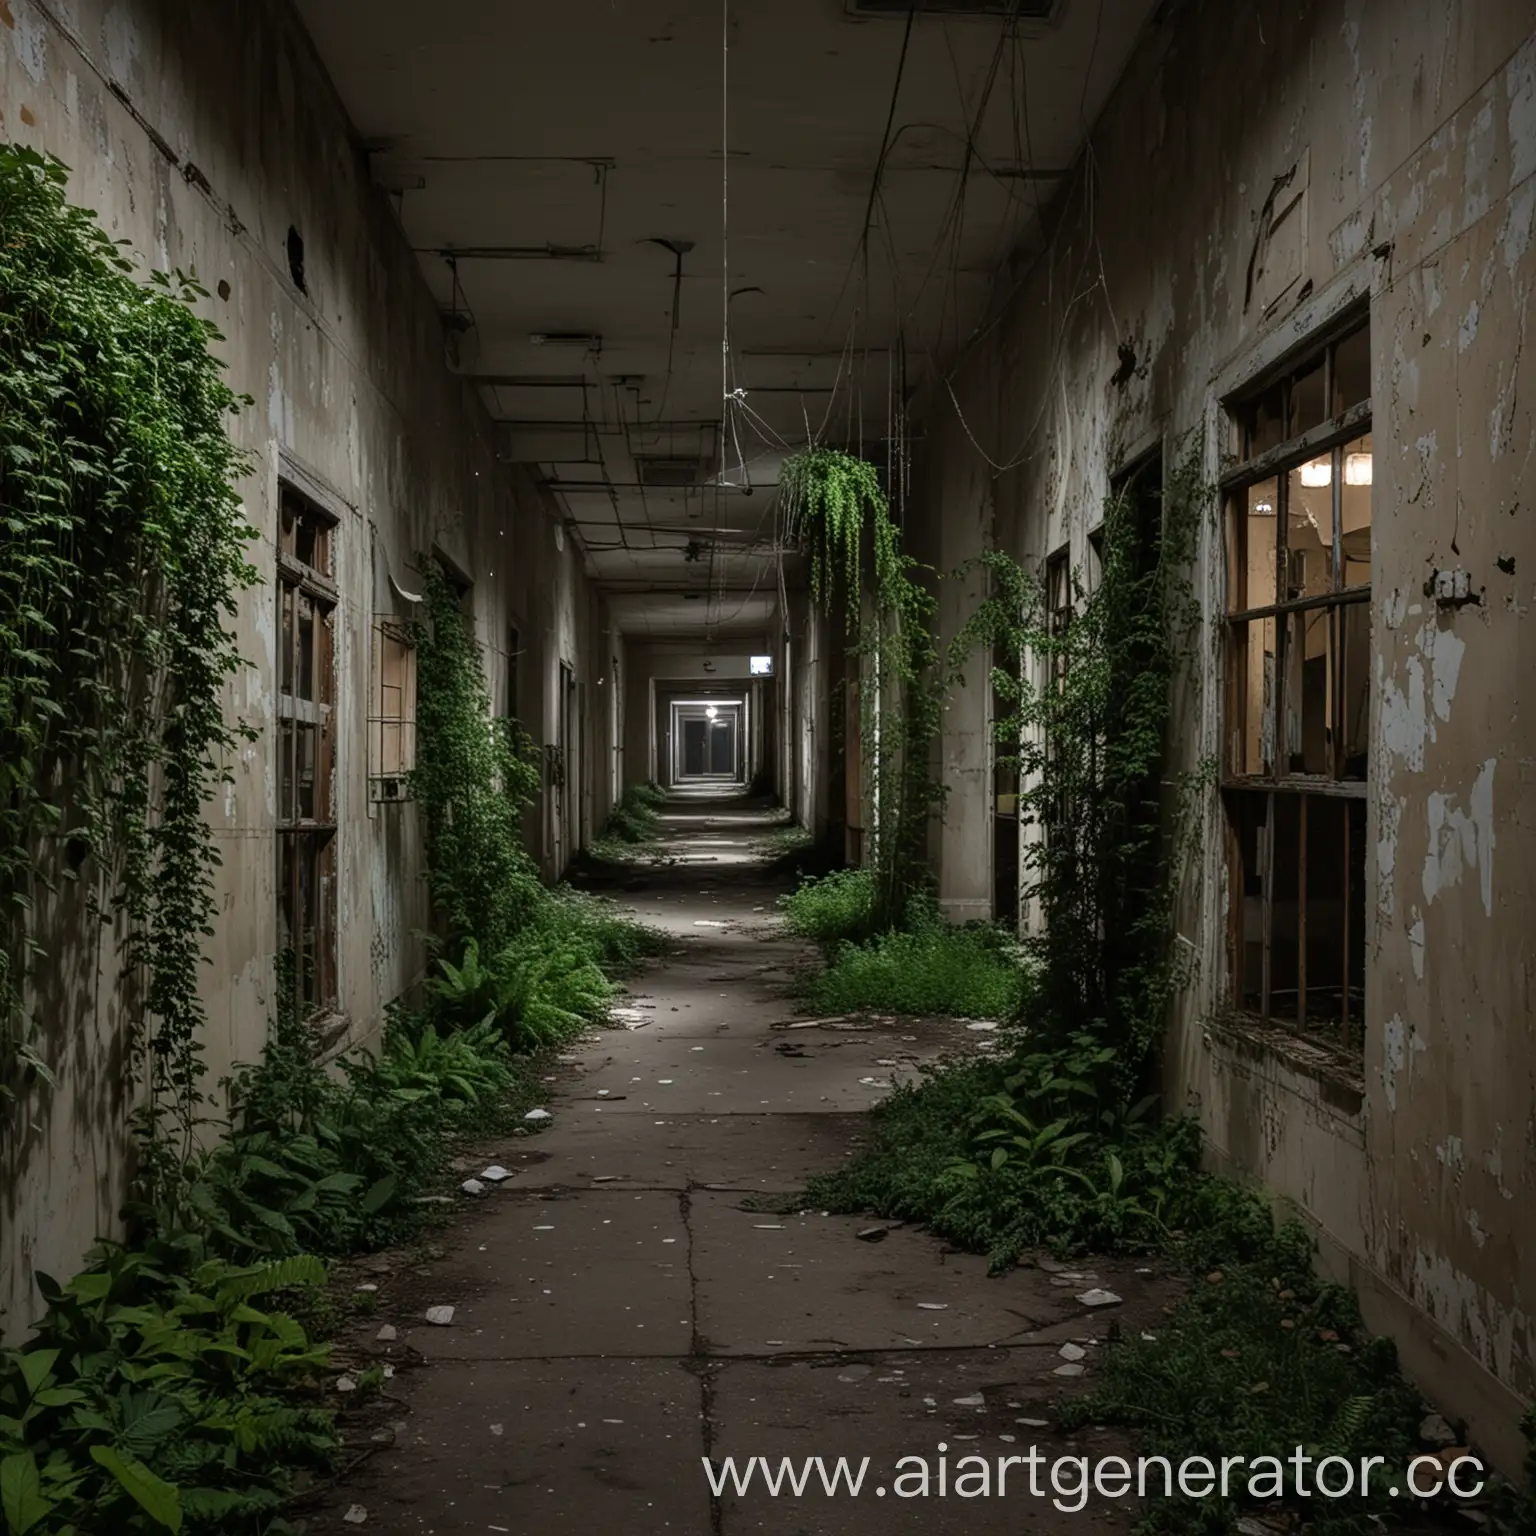 Desolate-Night-Street-Inside-Abandoned-Psychiatric-Hospital-with-Hanging-Plants